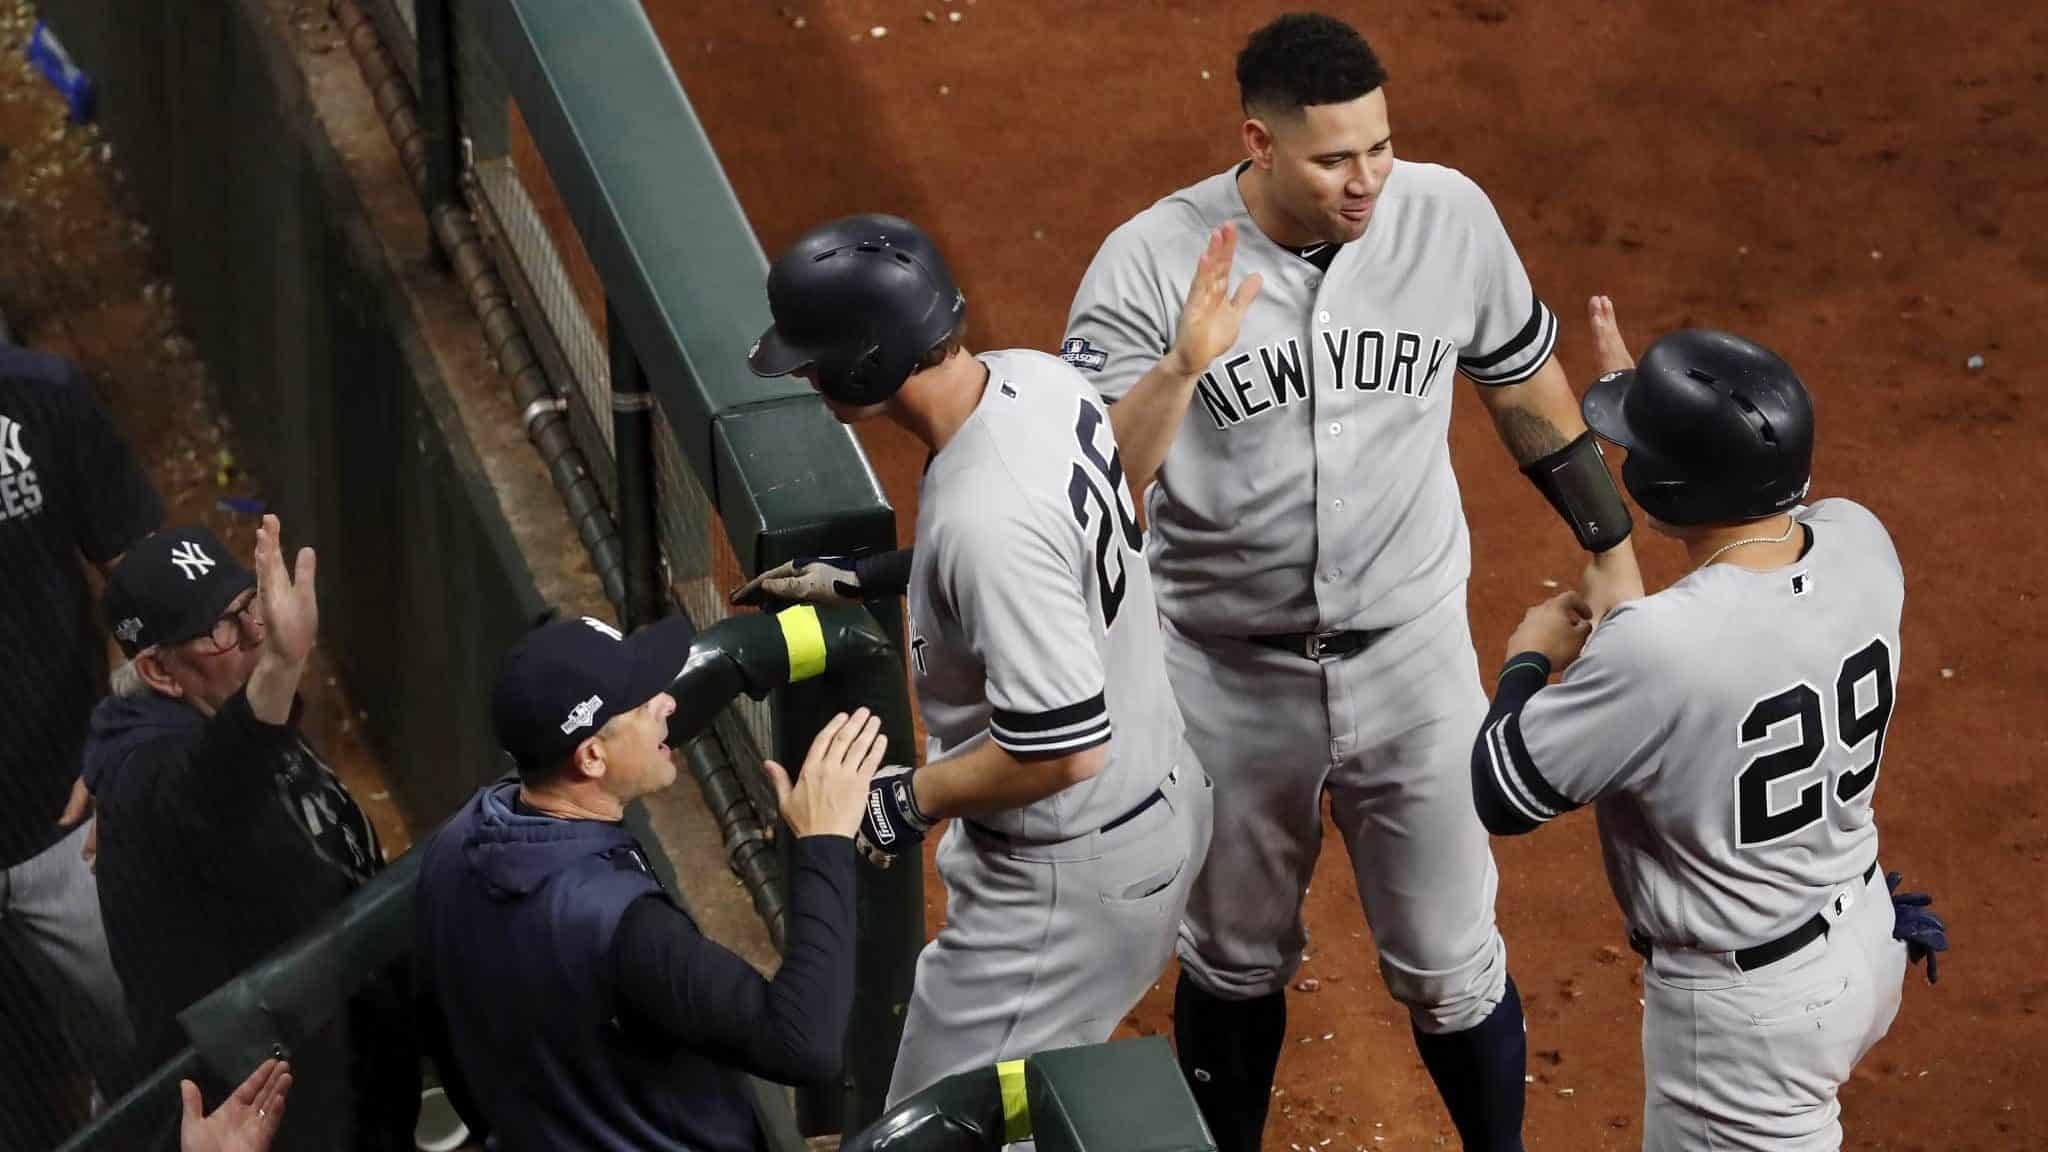 HOUSTON, TX - OCTOBER 19: DJ LeMahieu #26 of the New York Yankees is congratulated in the dugout after a home run in the ninth inning against the Houston Astros during Game Six of the League Championship Series at Minute Maid Park on October 19, 2019 in Houston, Texas.